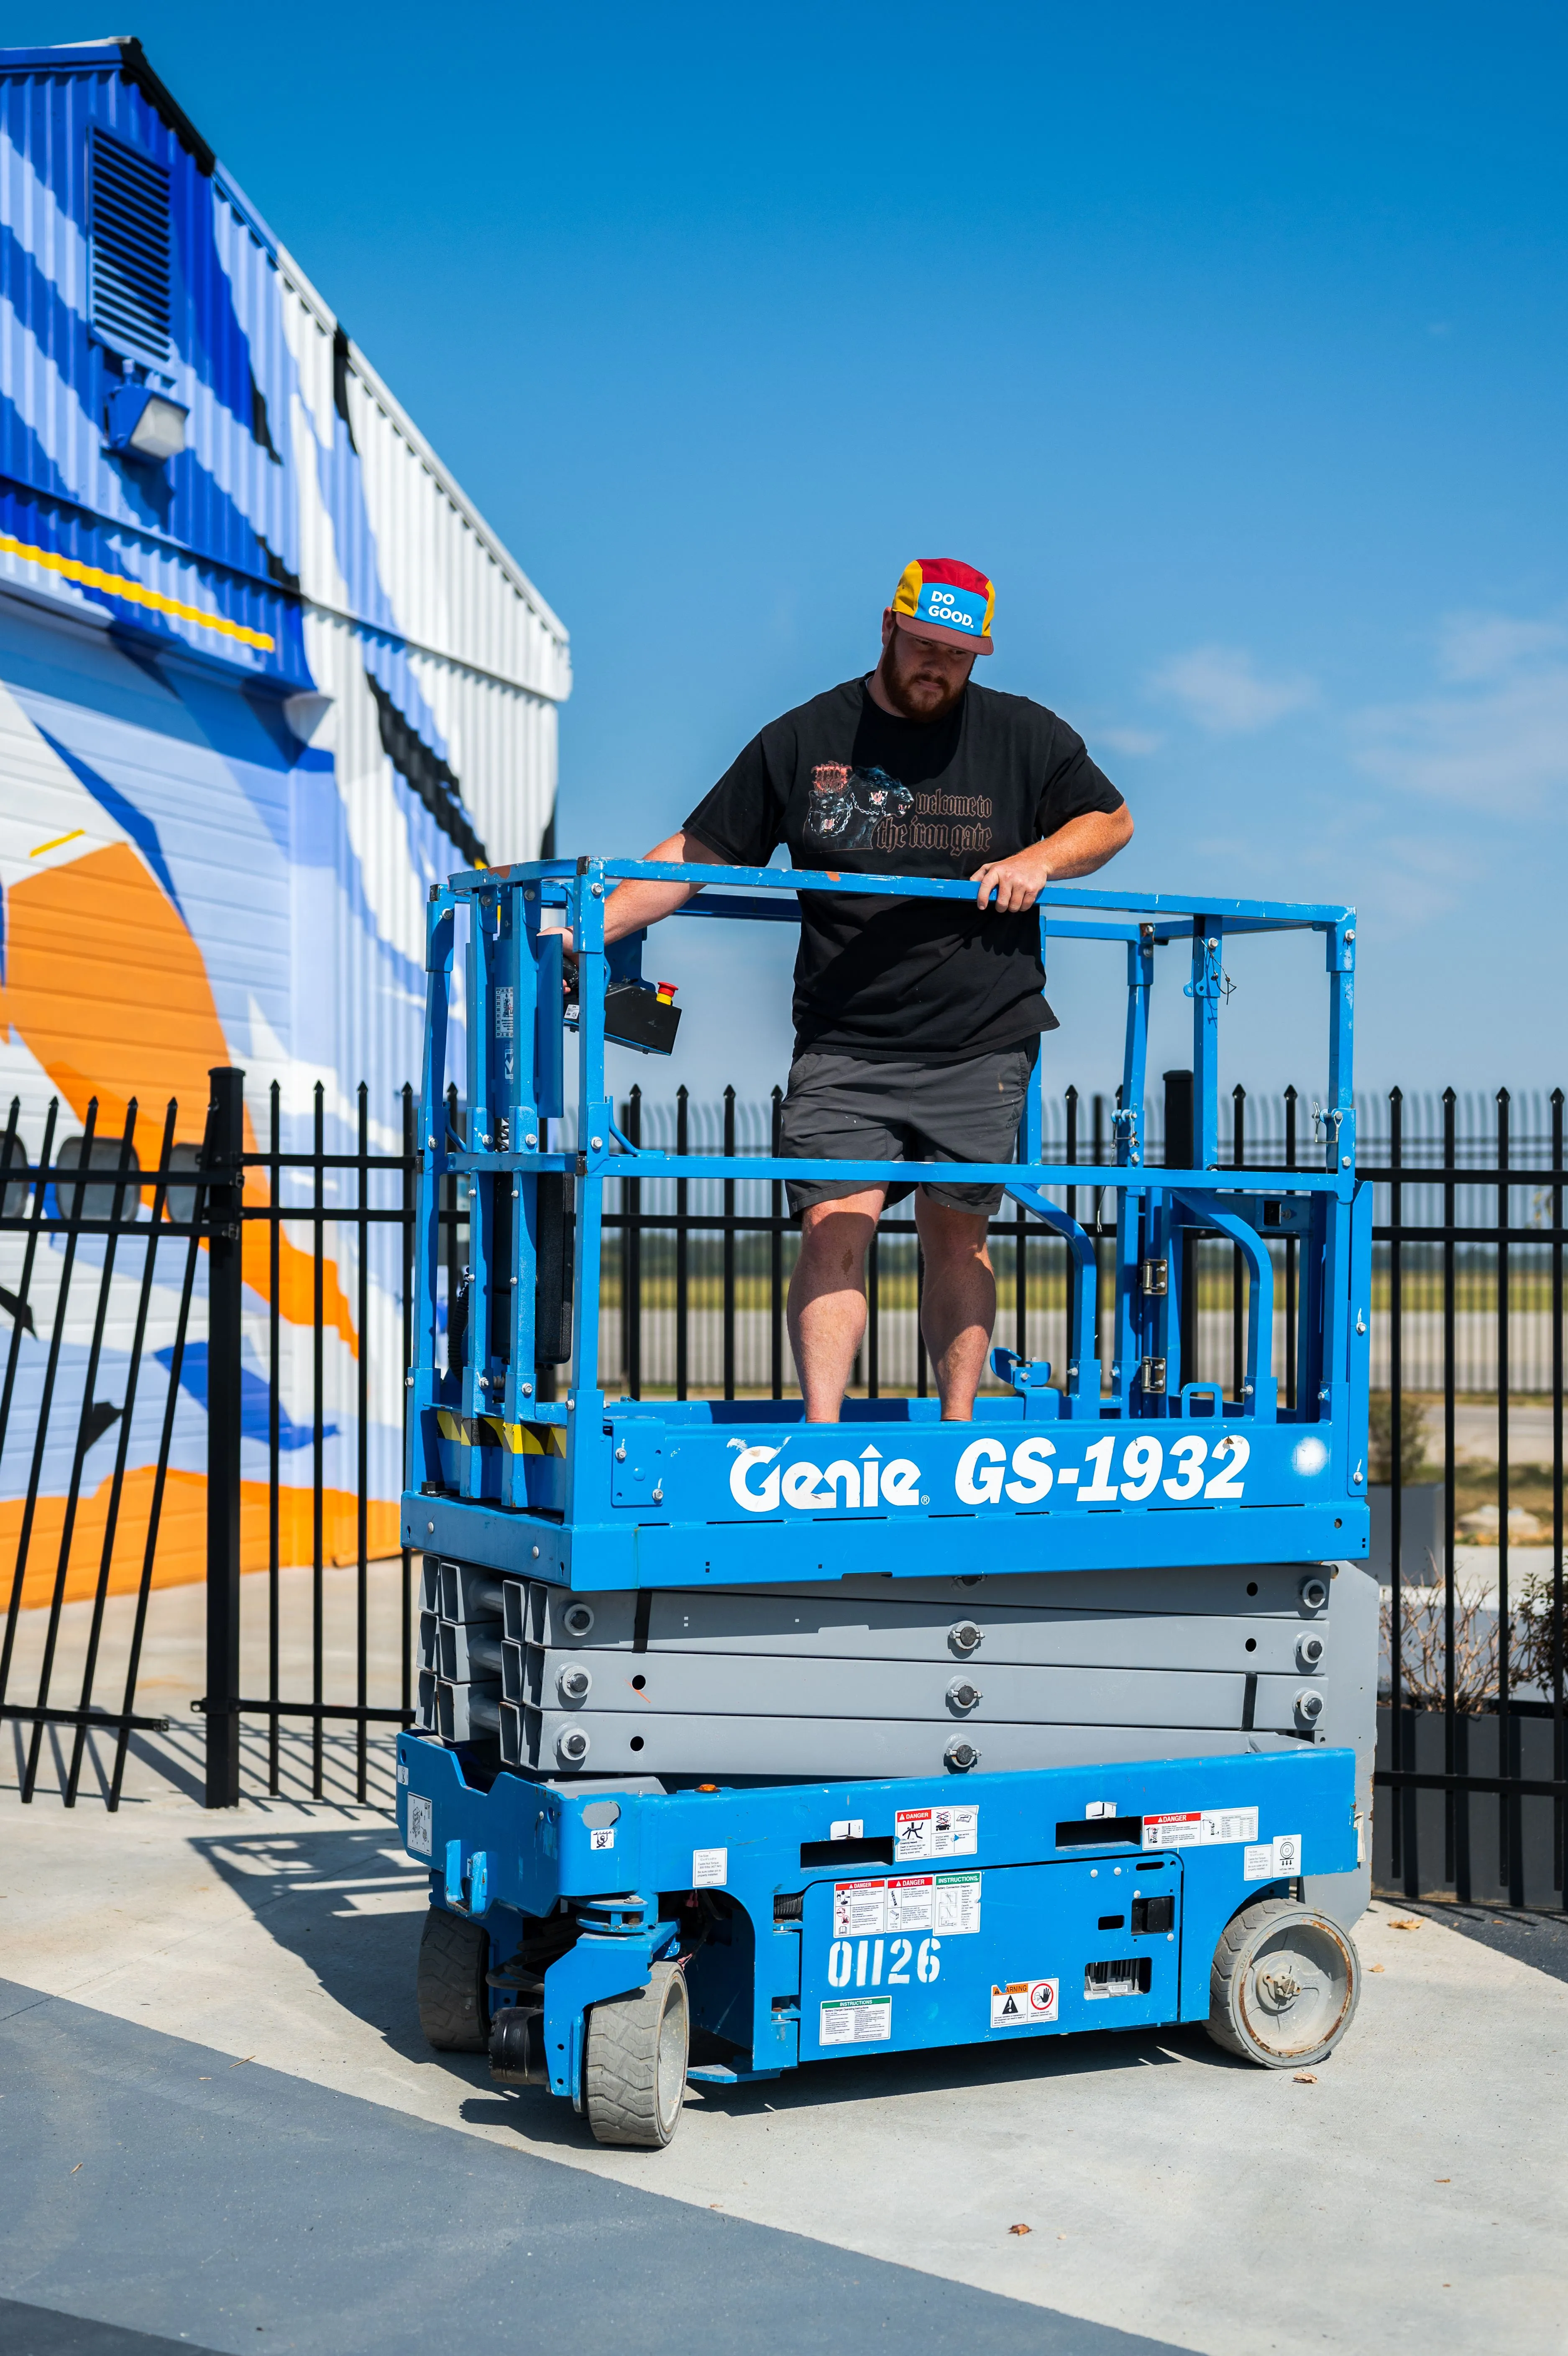 Man standing on a blue Genie GS-1932 scissor lift in front of an industrial building with blue and white striped walls.